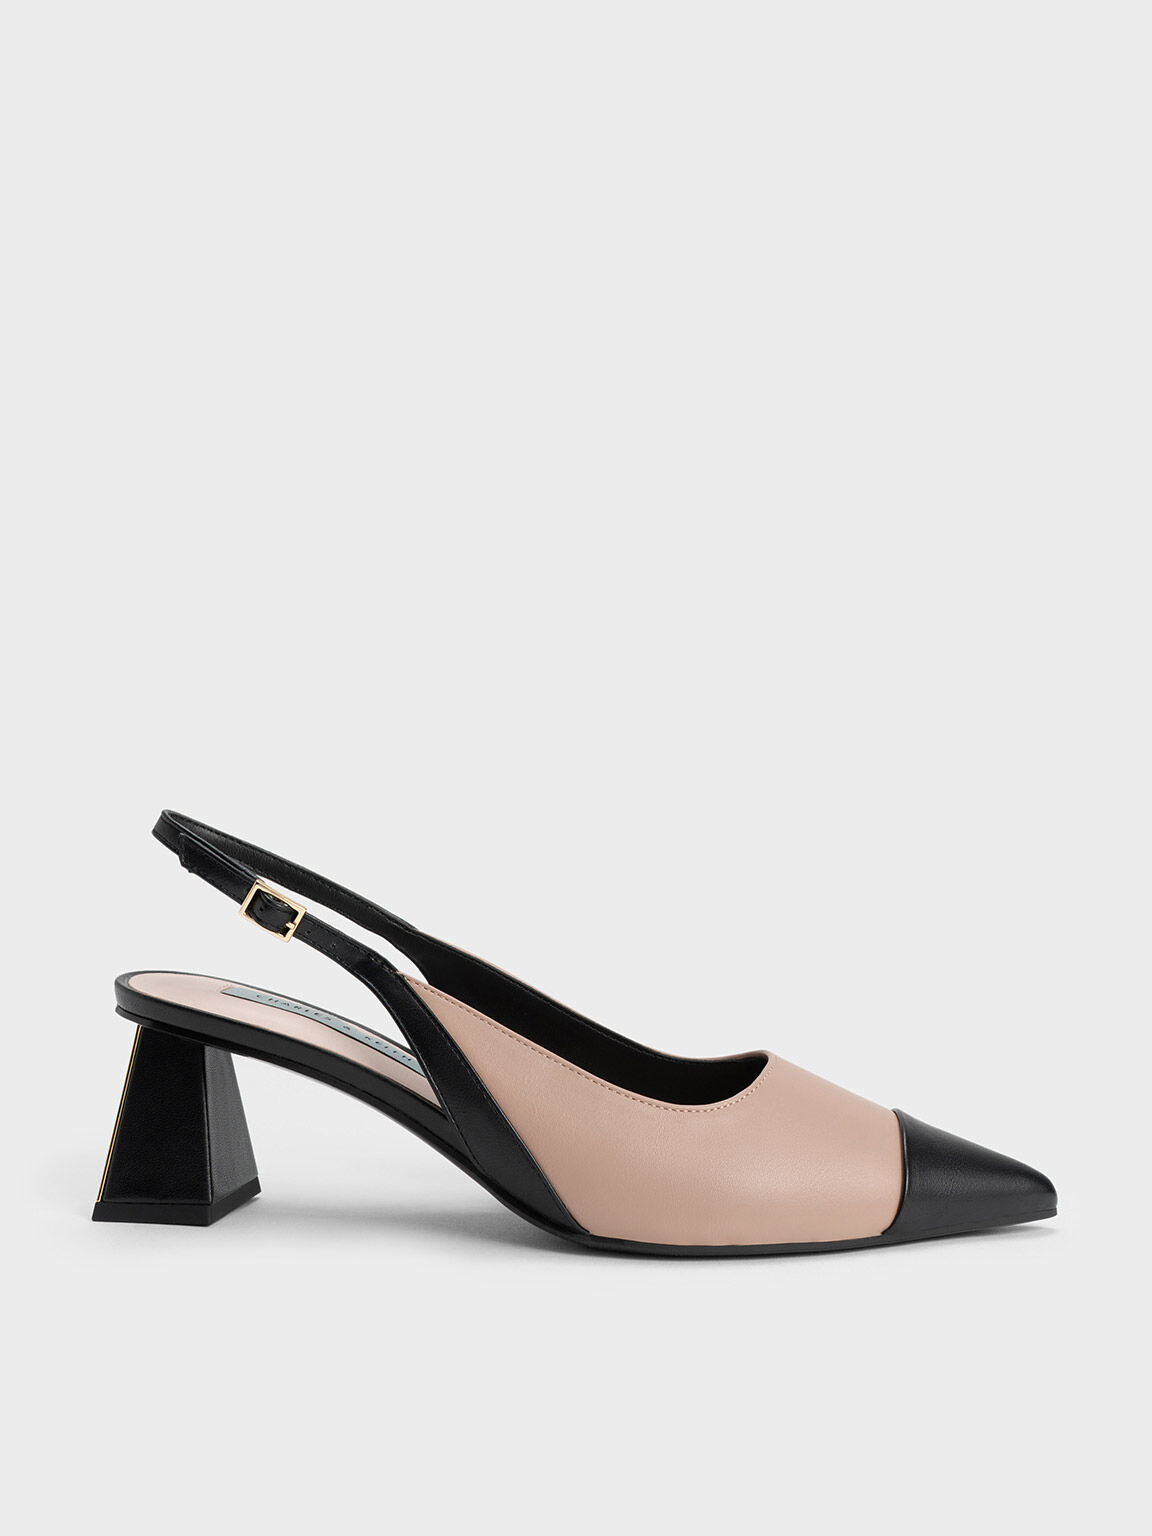 Calla Leather Block Heels,two-tone Pumps,beige With Black Shoes,pointed Toe  Slingback,closed Toe Slingback,black Toe Shoes,women Shoes -  Norway